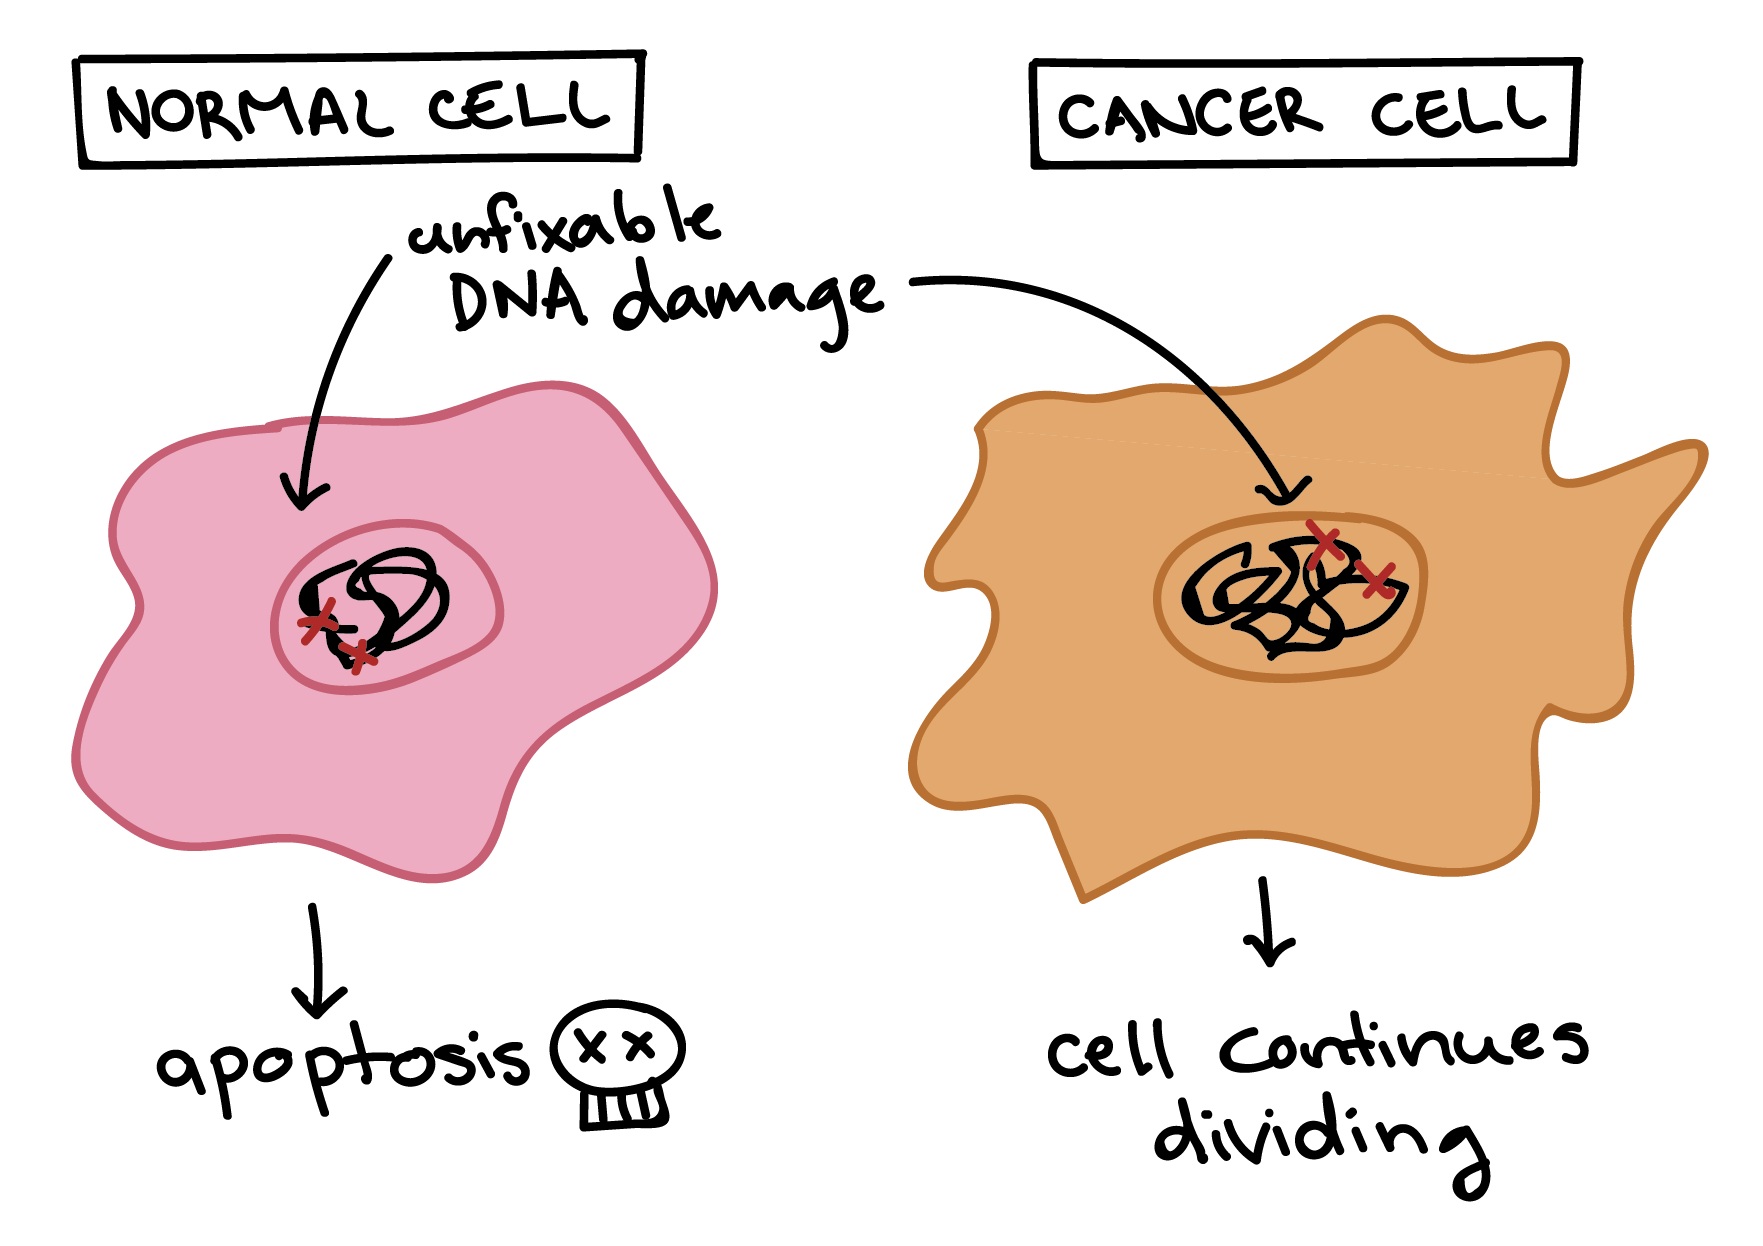 Diagram showing different responses of normal and cancer cells to conditions that would typically trigger apoptosis.

- A normal cell with unfixable DNA damaged will undergo apoptosis.

- A cancer cell with unfixable DNA damage will not undergo apoptosis and will instead continue dividing.